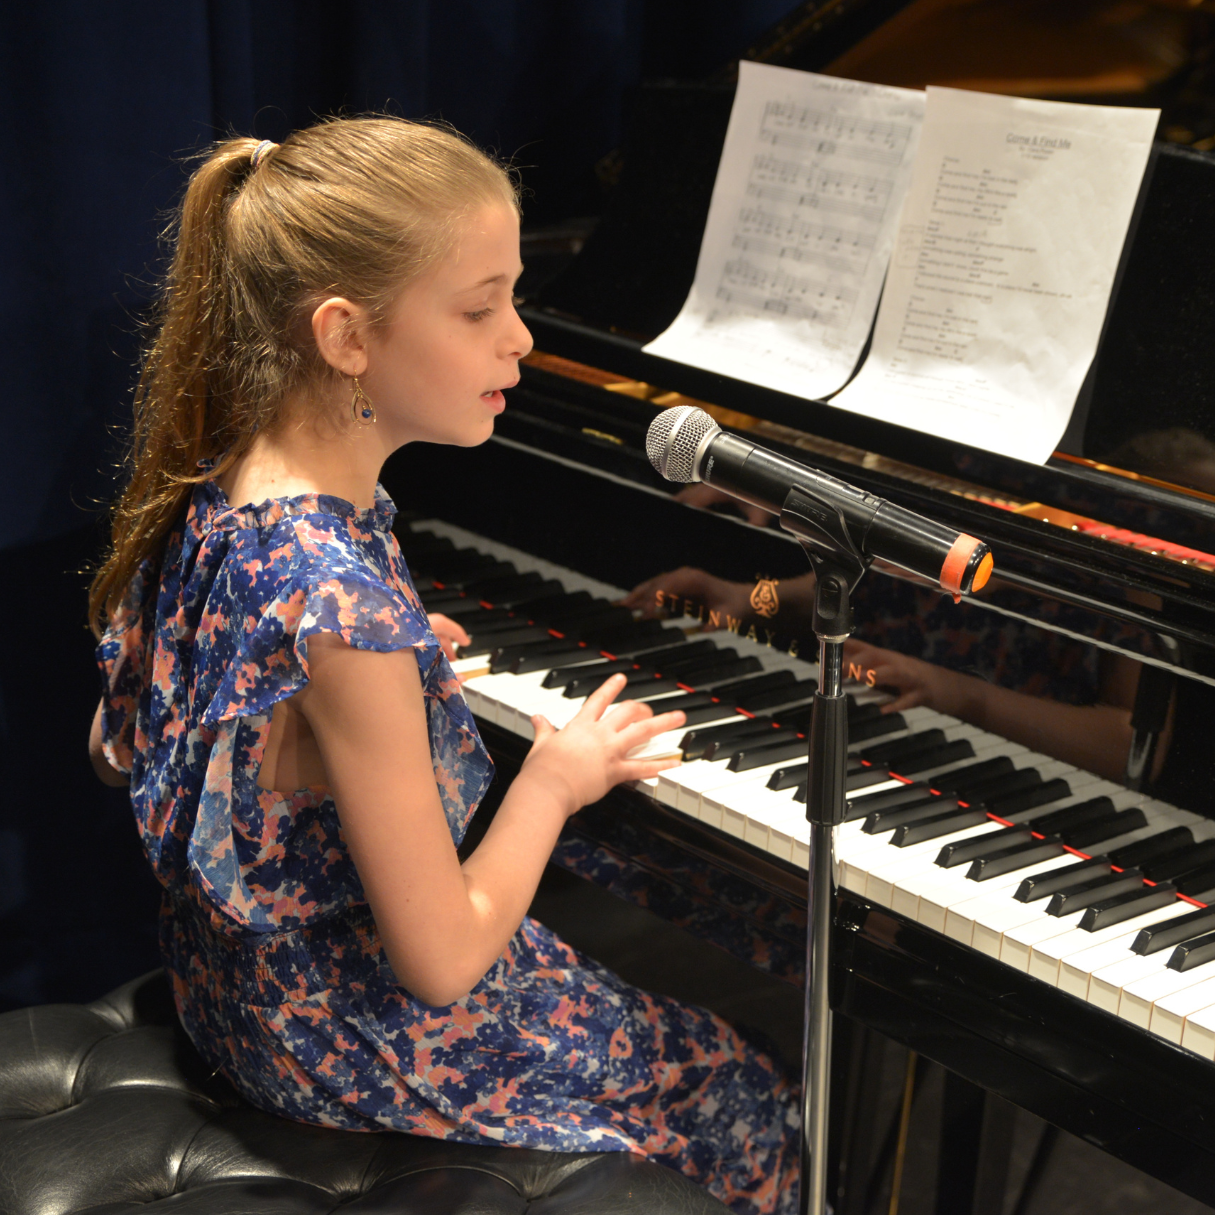 a young girl plays piano and sings her own song that she composed into a microphone